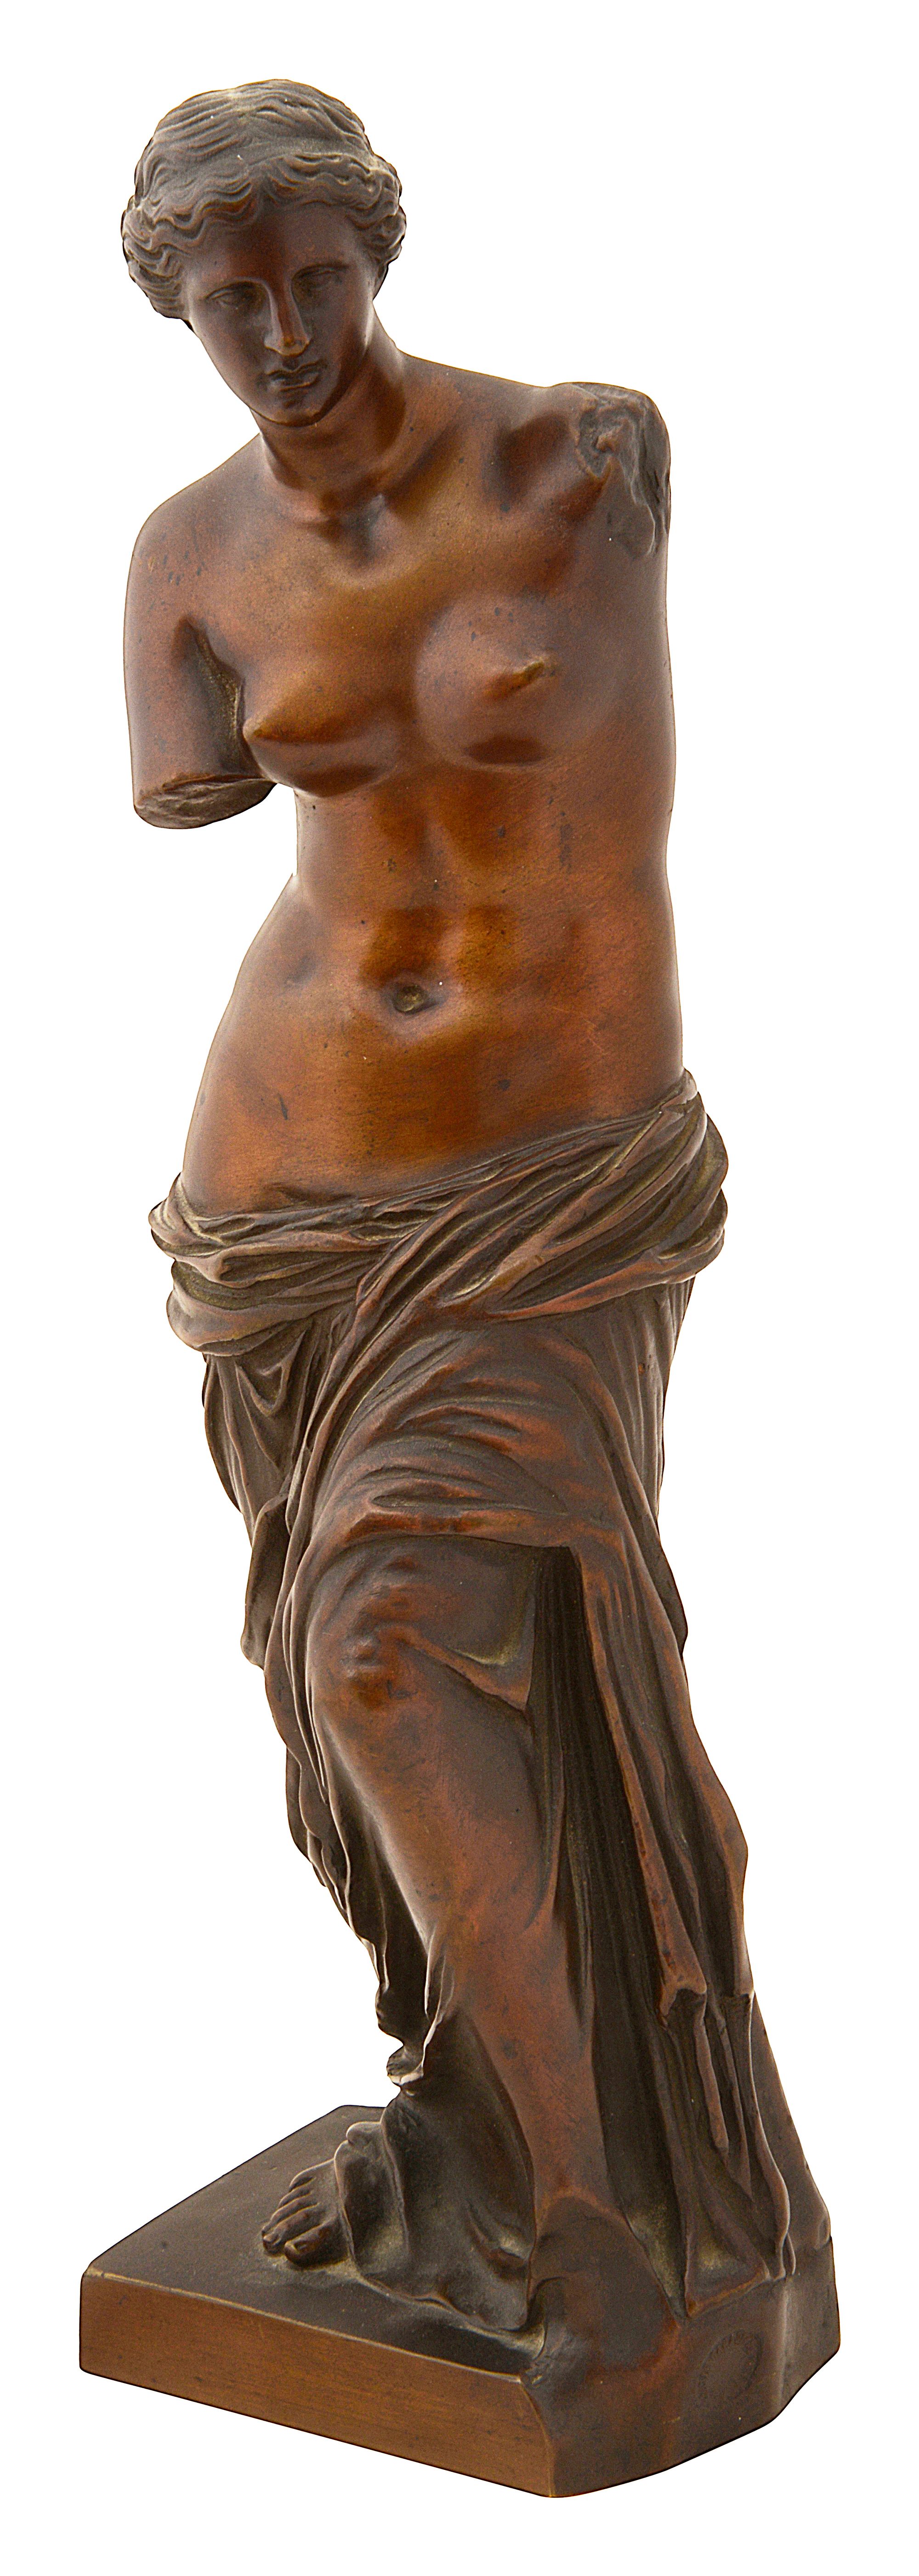 After the Antique. A 19th century French patinated bronze figure of the Venus de Milo